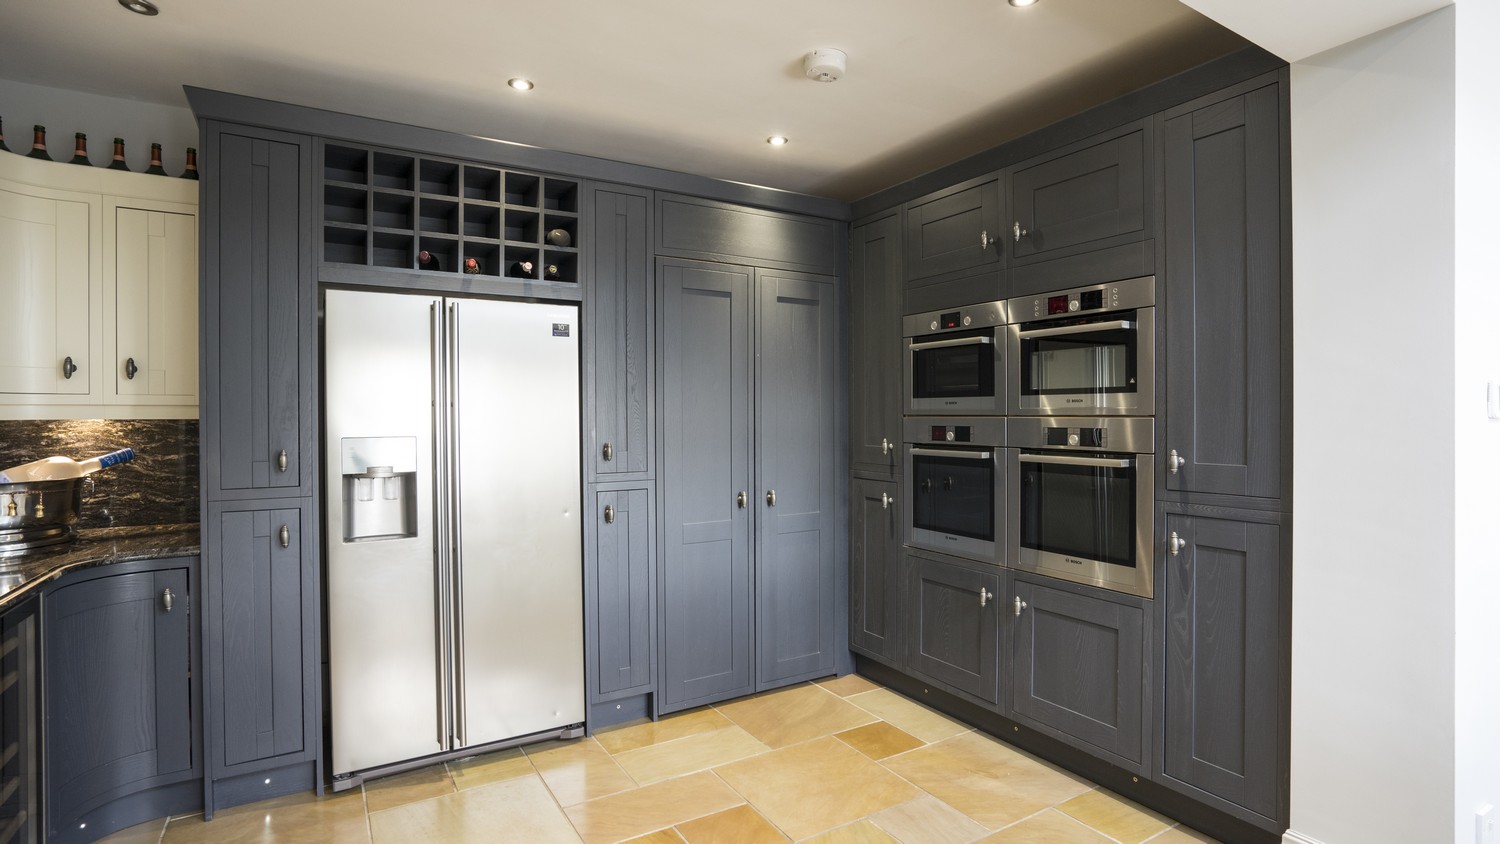 Close up of the larder cupboard housing the various built in appliances, wine rack and hidden entry to the utility room.